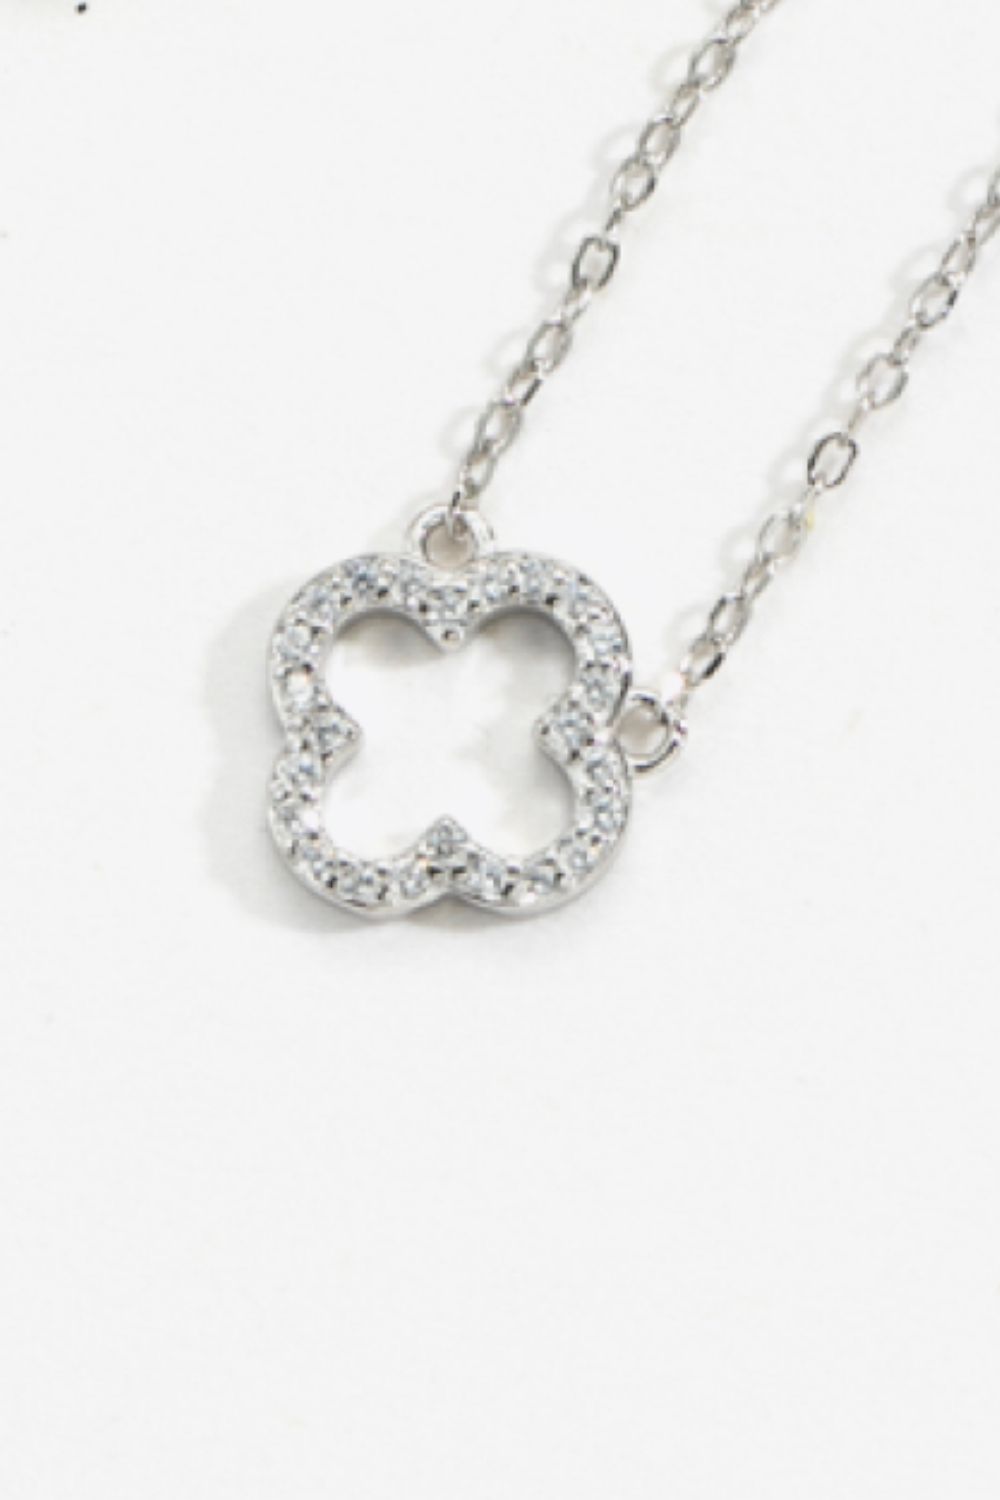 - Inlaid Cubic Zirconia 925 Sterling Silver Necklace - 2 options - necklace at TFC&H Co.